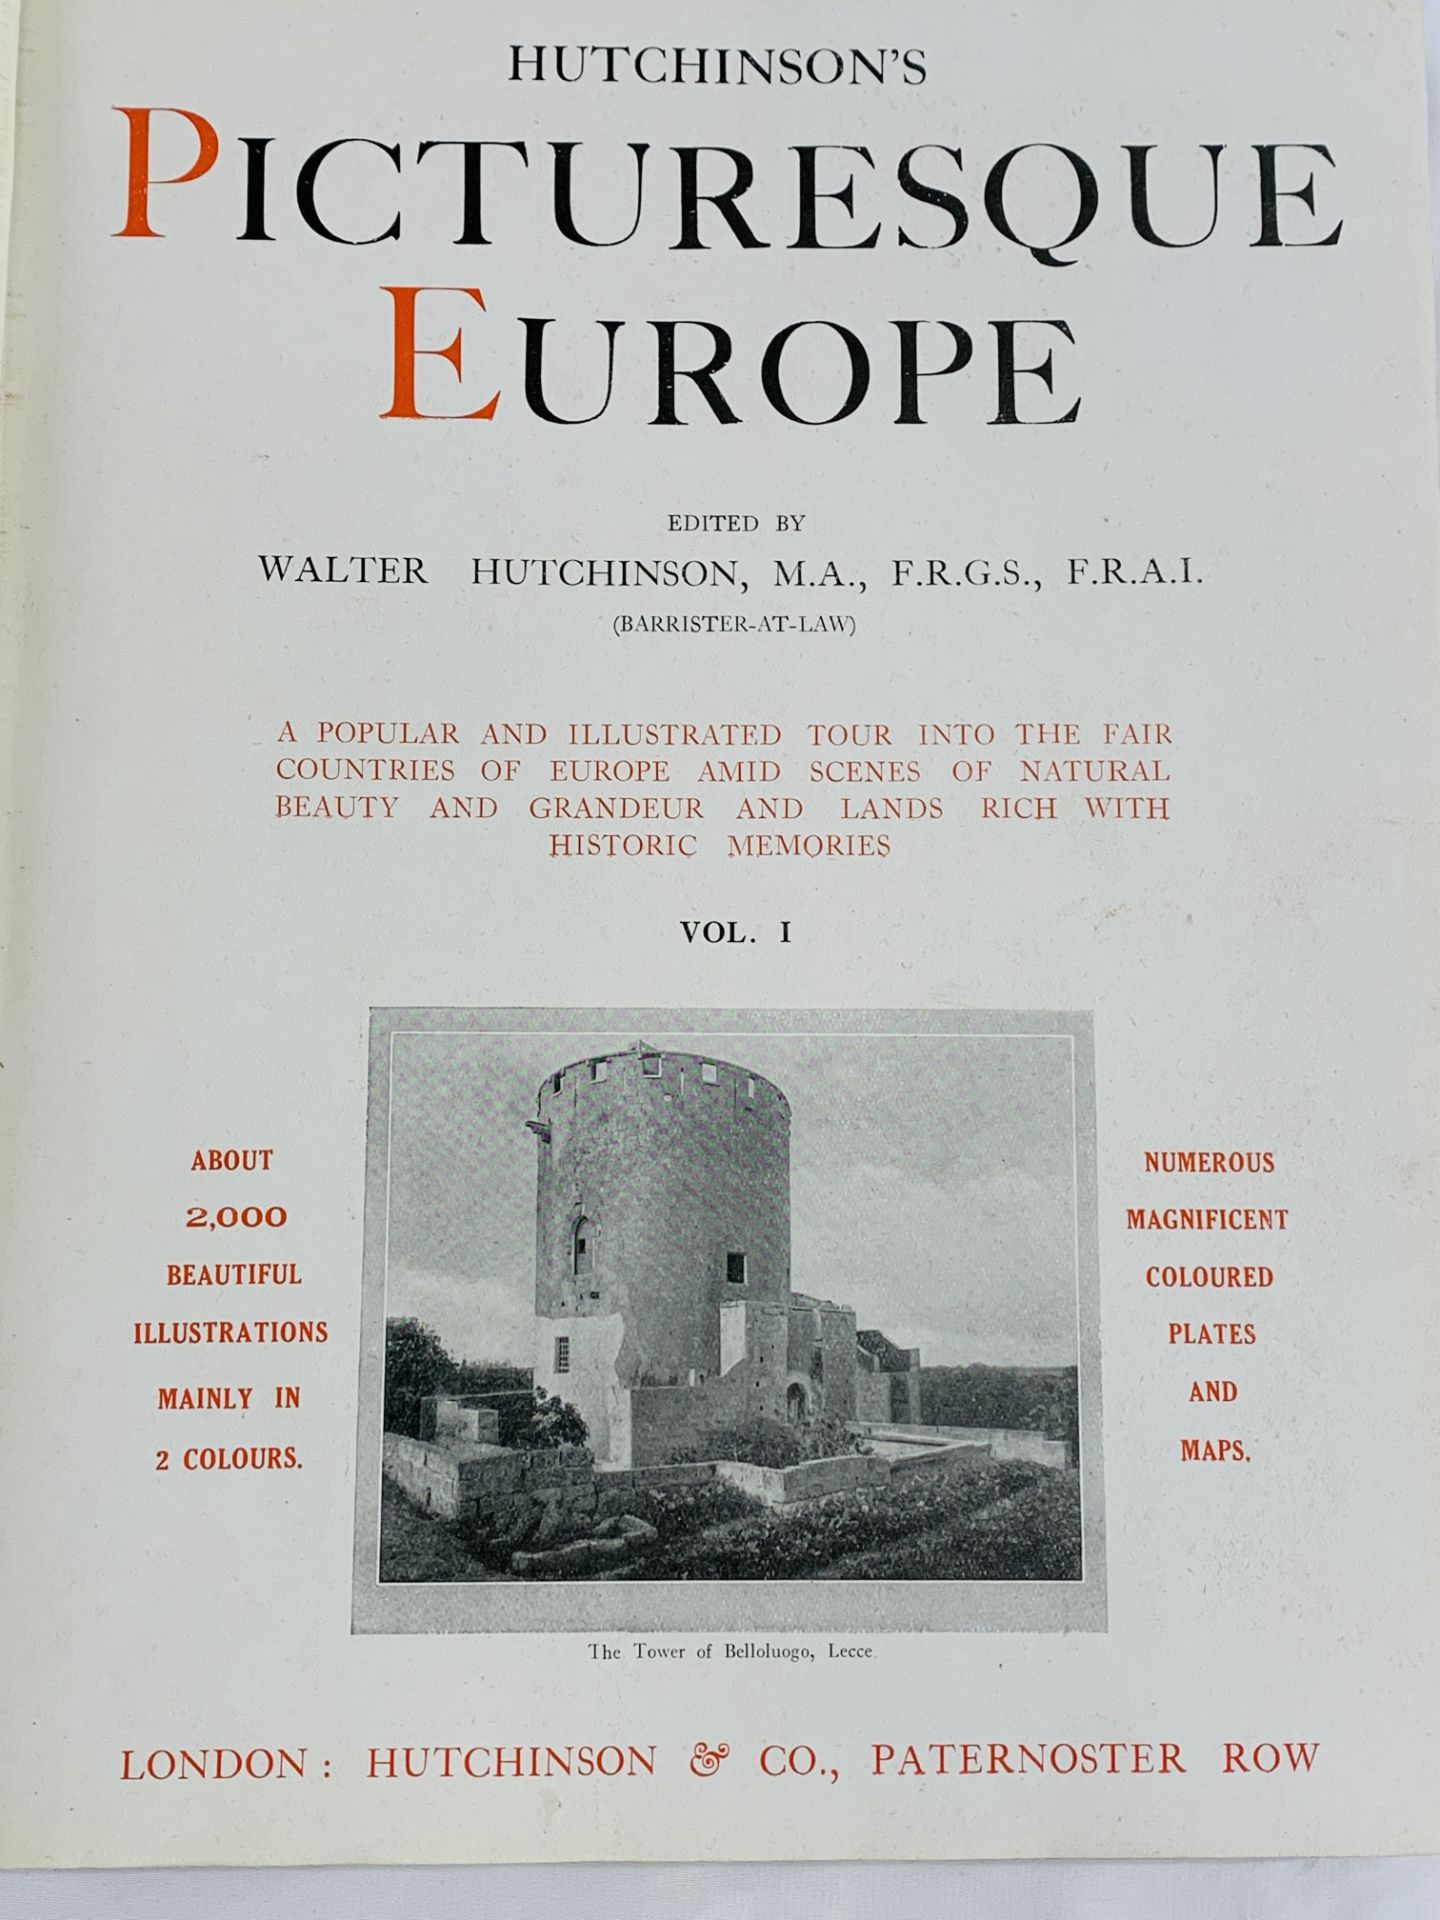 Hutchinson's Picturesque Europe, 3 volumes circa 1910-1920 - Image 3 of 4